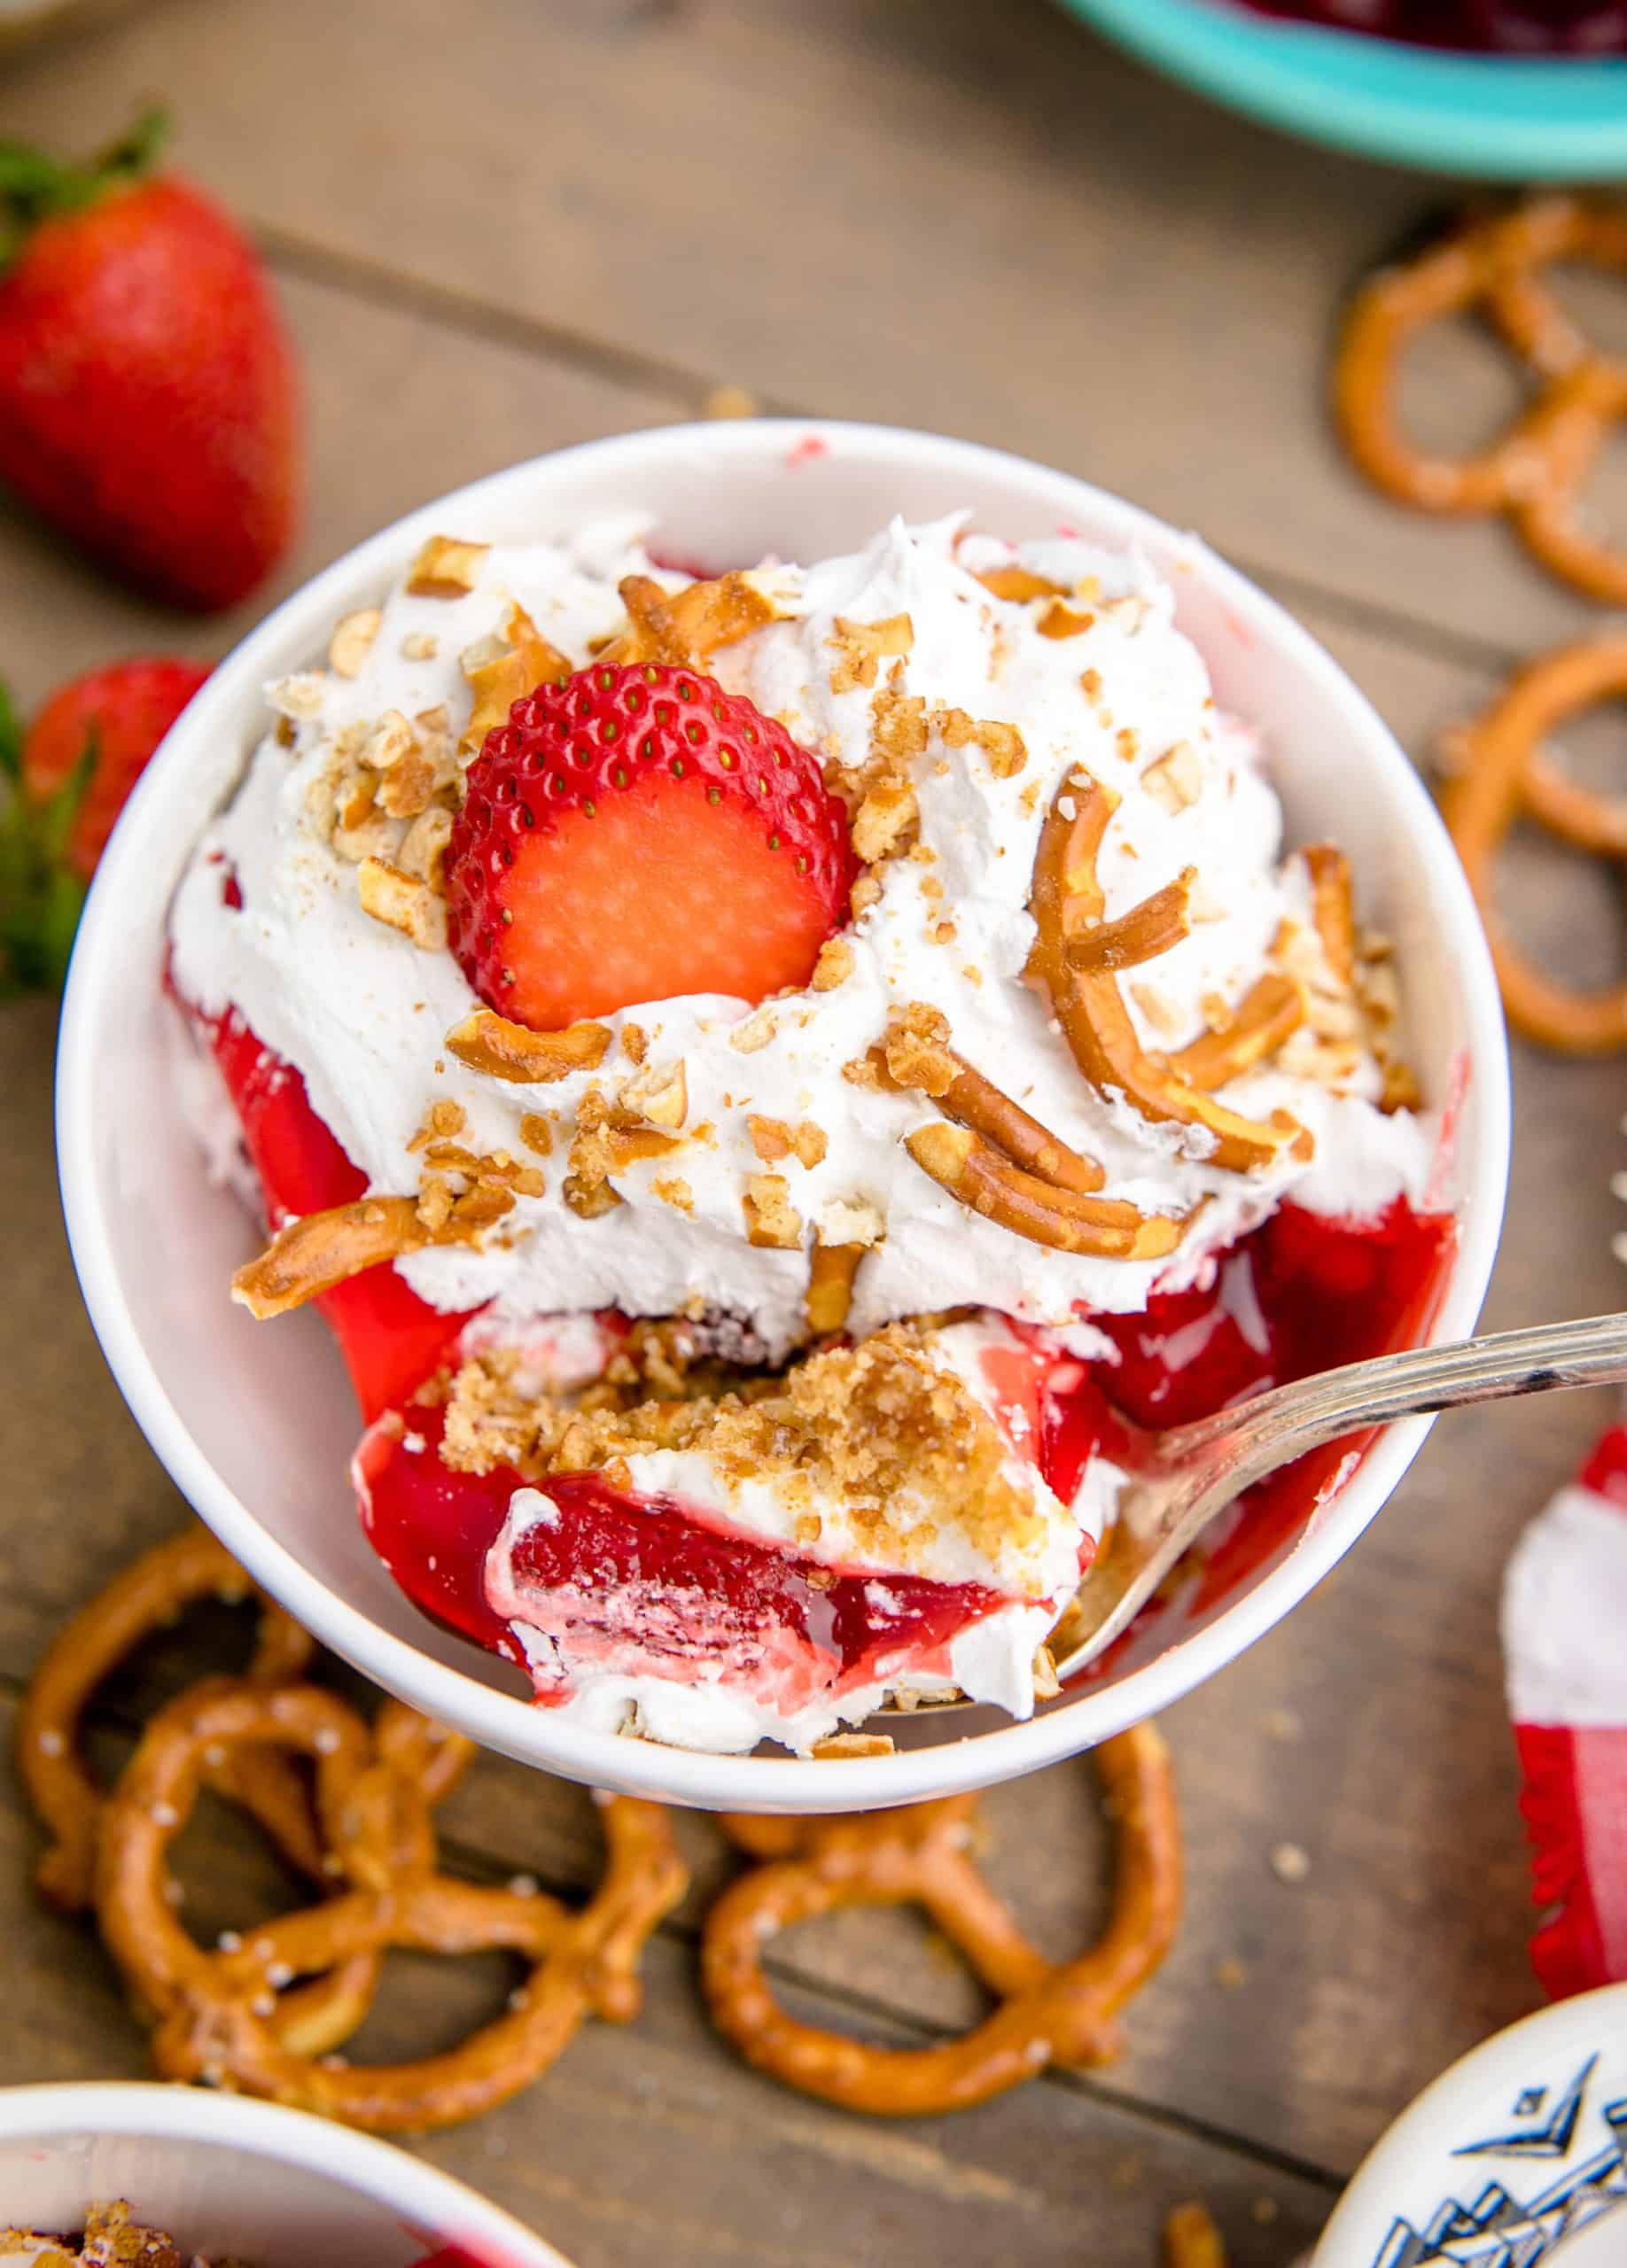 Overhead photo of Strawberry Pretzel Dessert in white bowl with spoon surrounded by pretzels and strawberries.